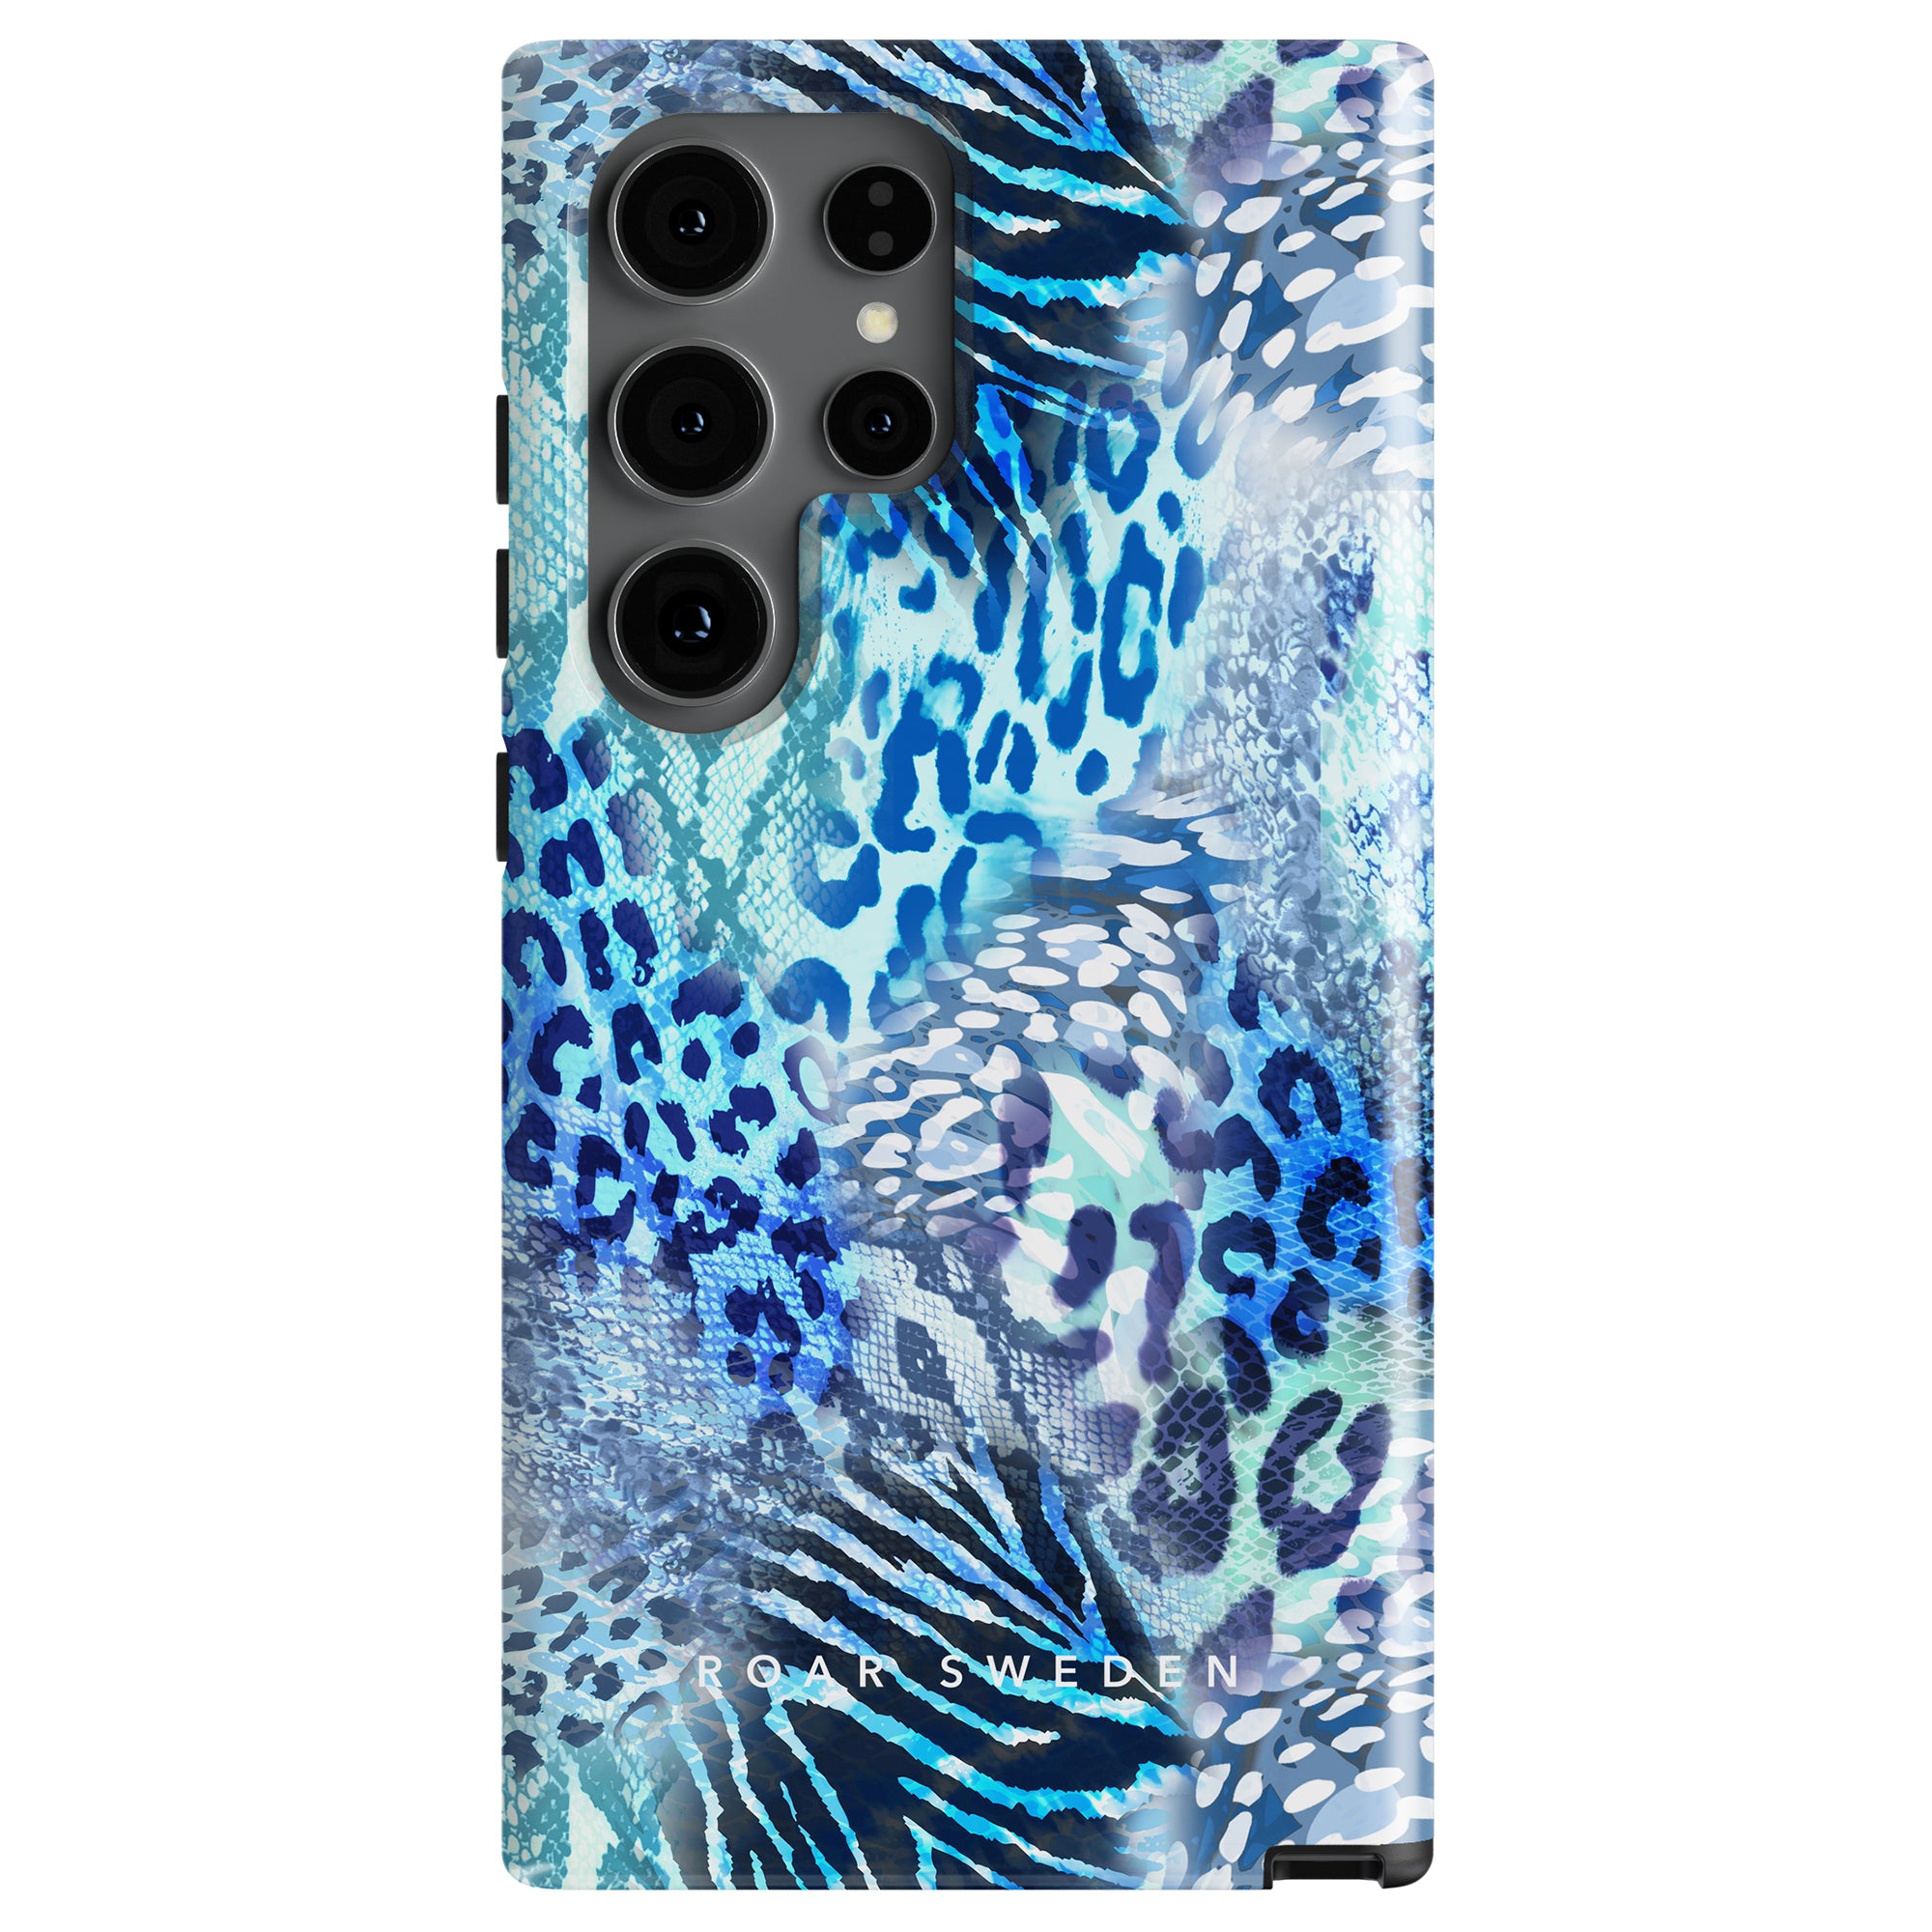 A tough case with a blue and white animal print pattern, resembling a Bloom Panther, featuring four black camera lenses. The text "Snow Leopard - Tough Case" is written at the bottom.